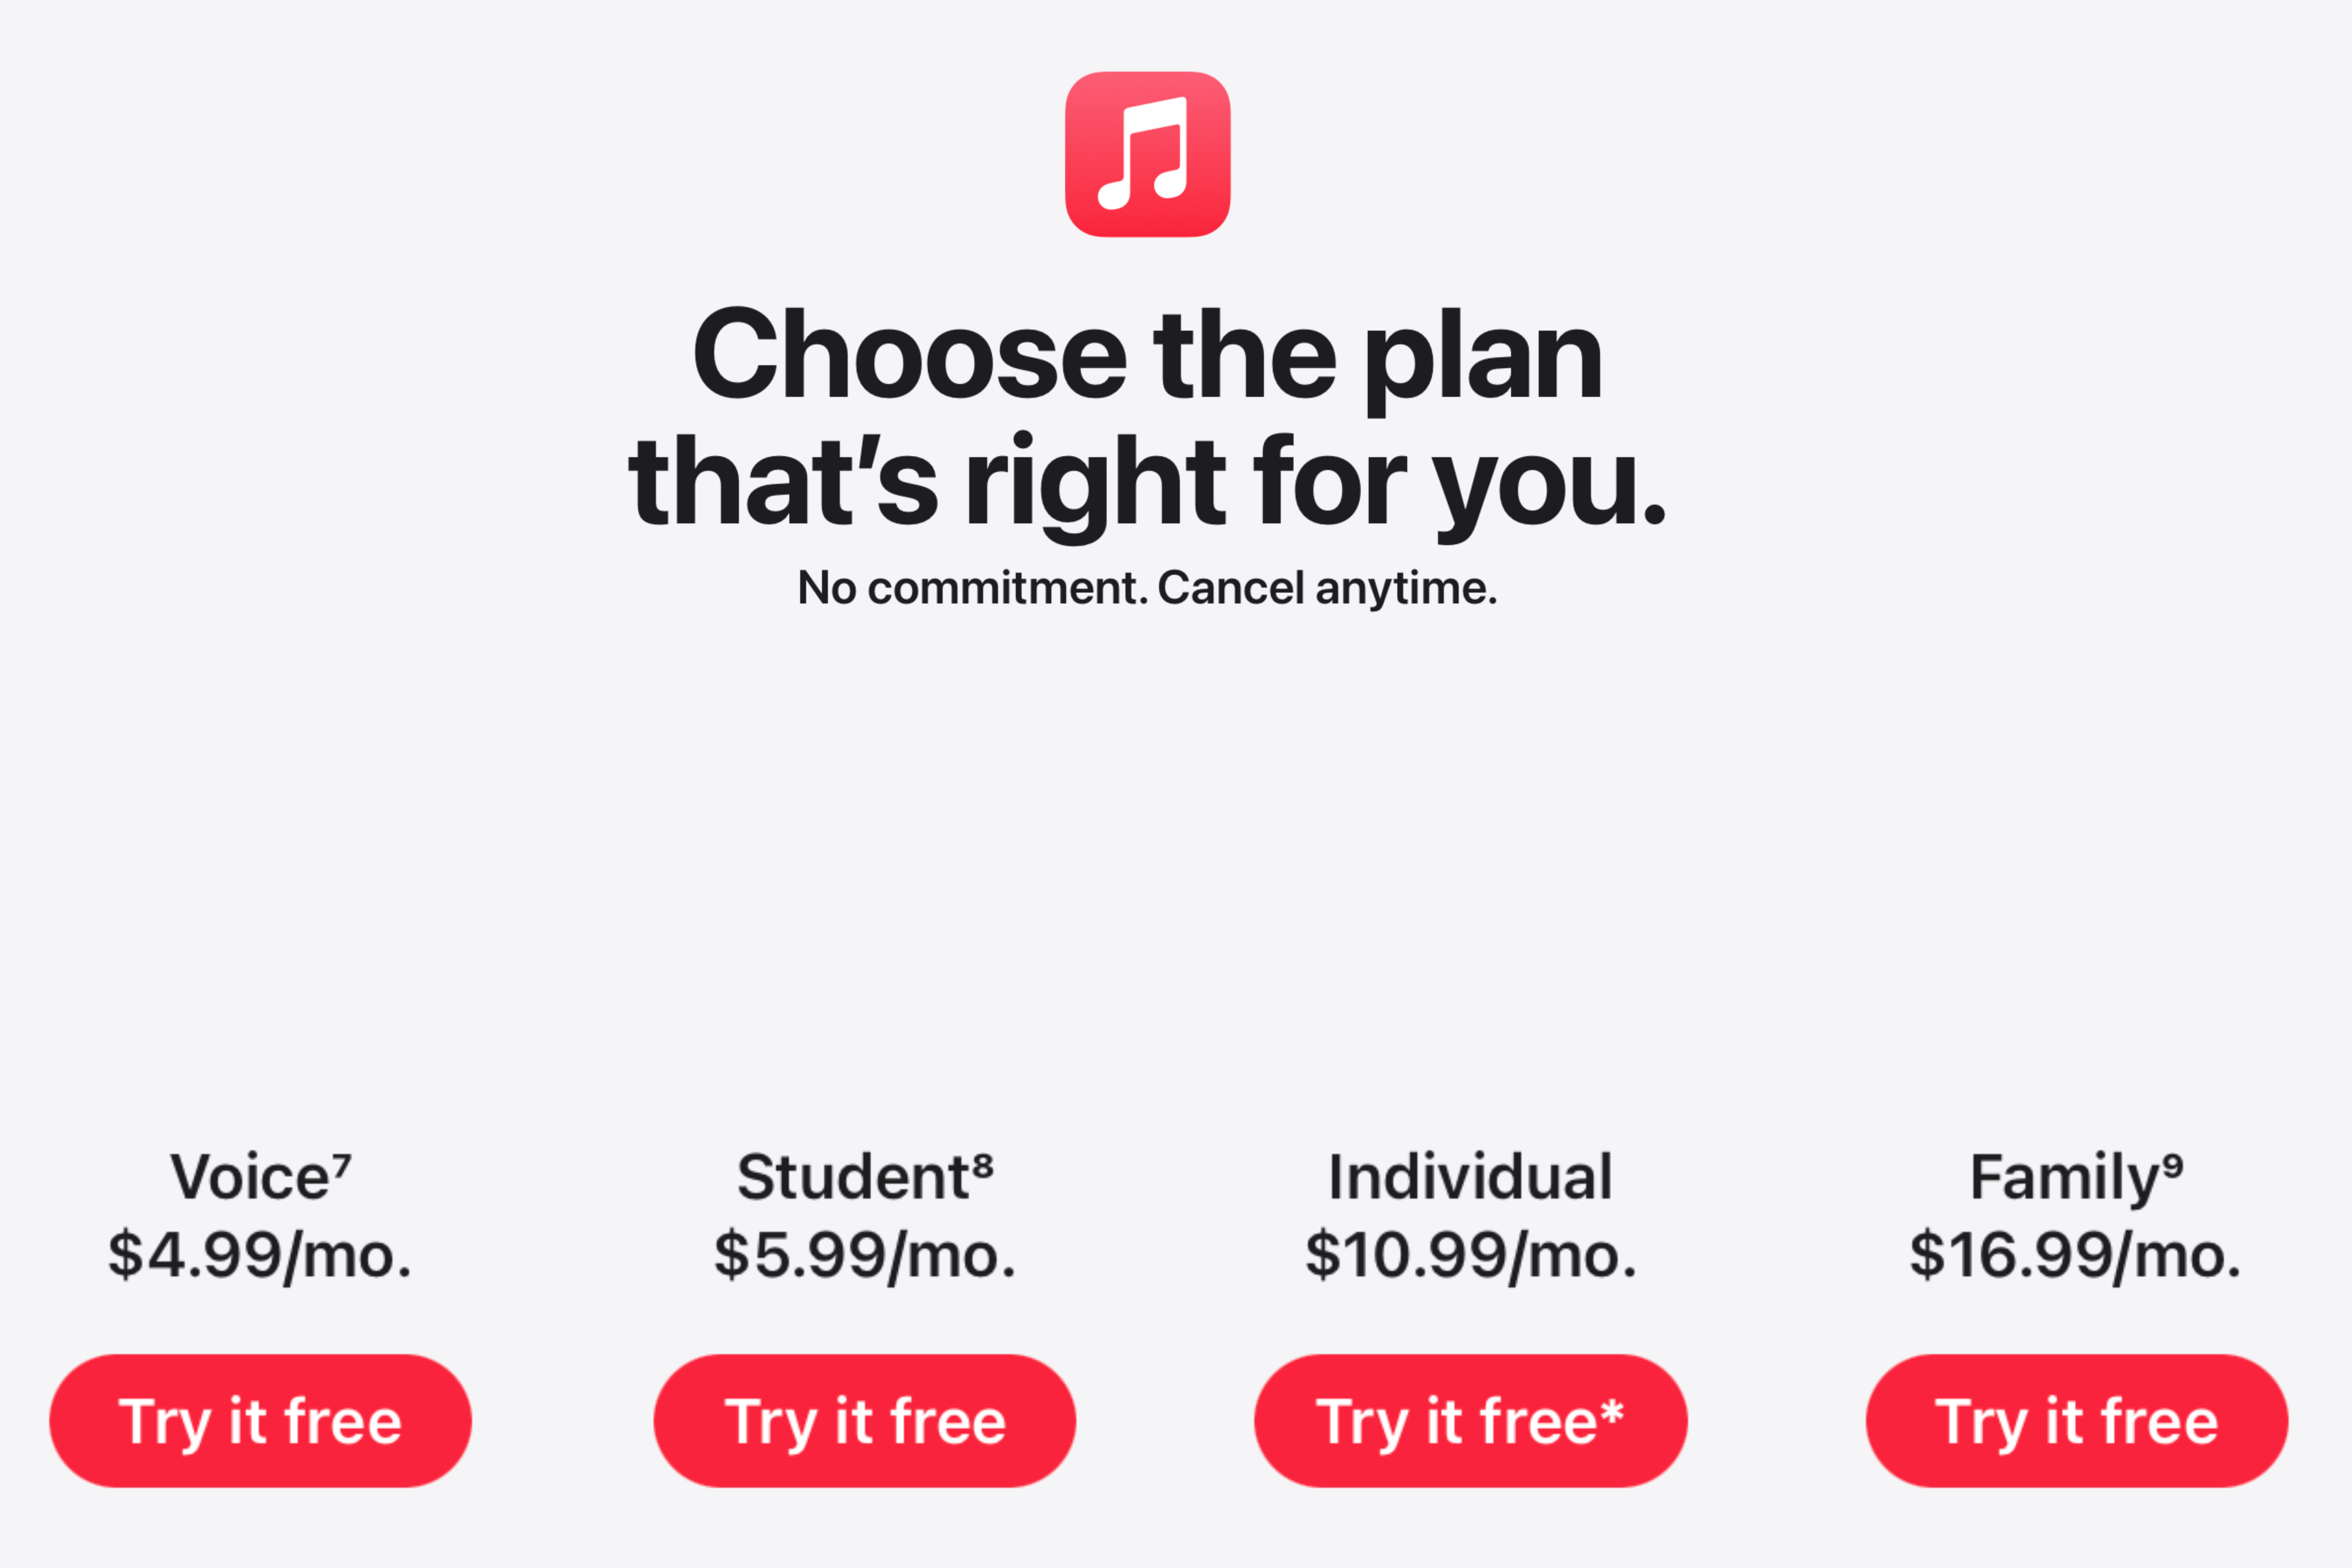 A screenshot showing current pricing for Apple Music services.